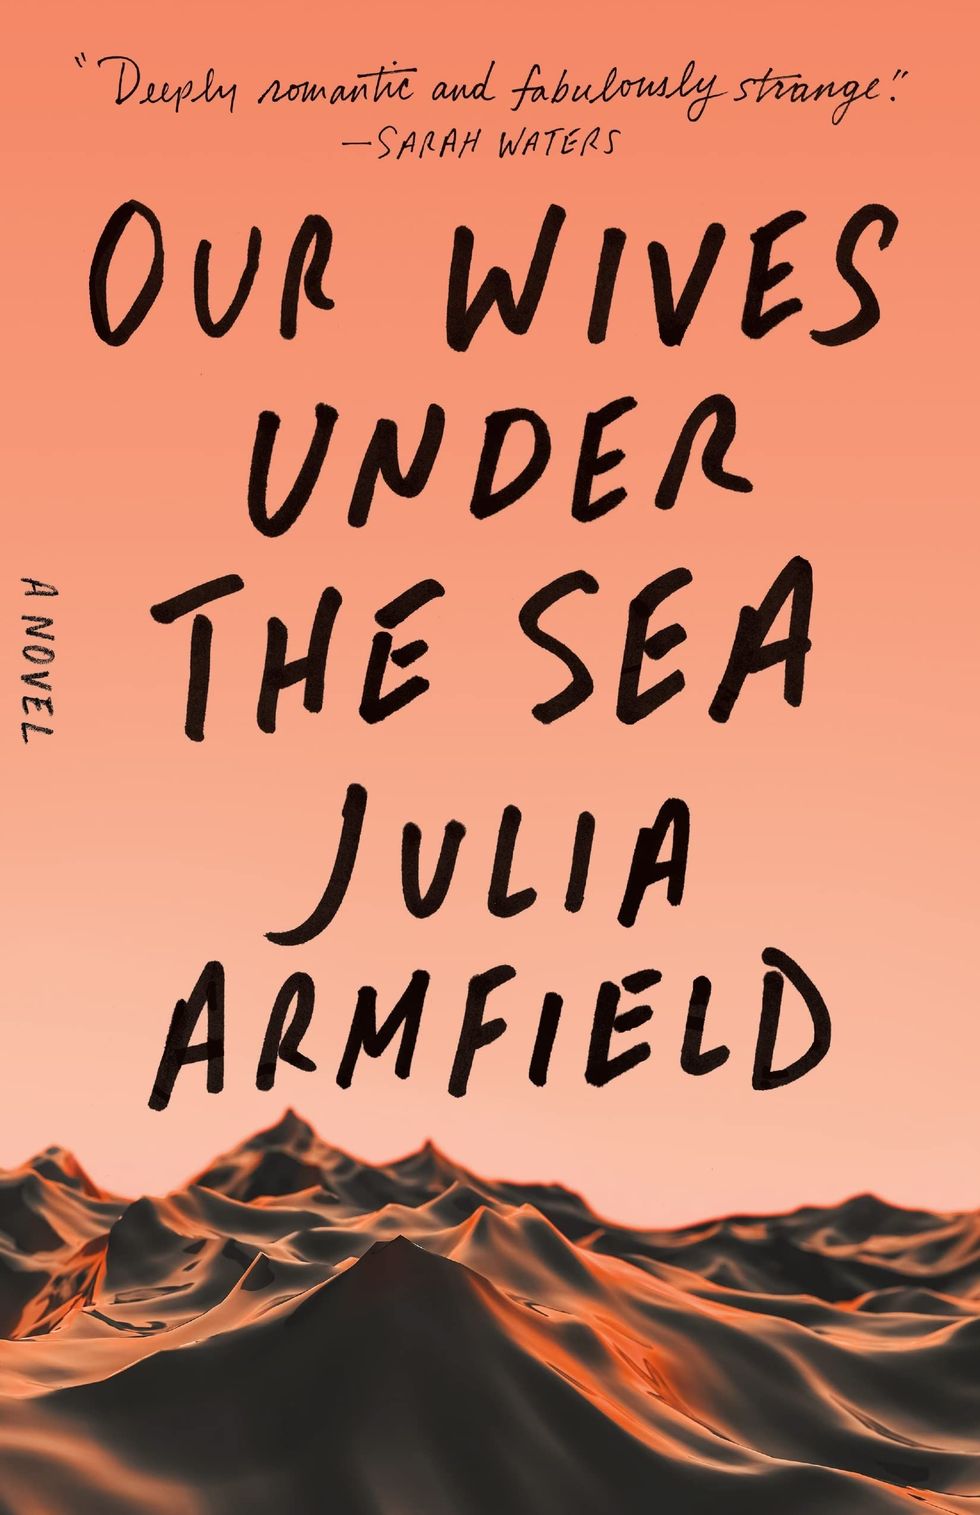 Our Wives Under the Sea by Julia Armfield